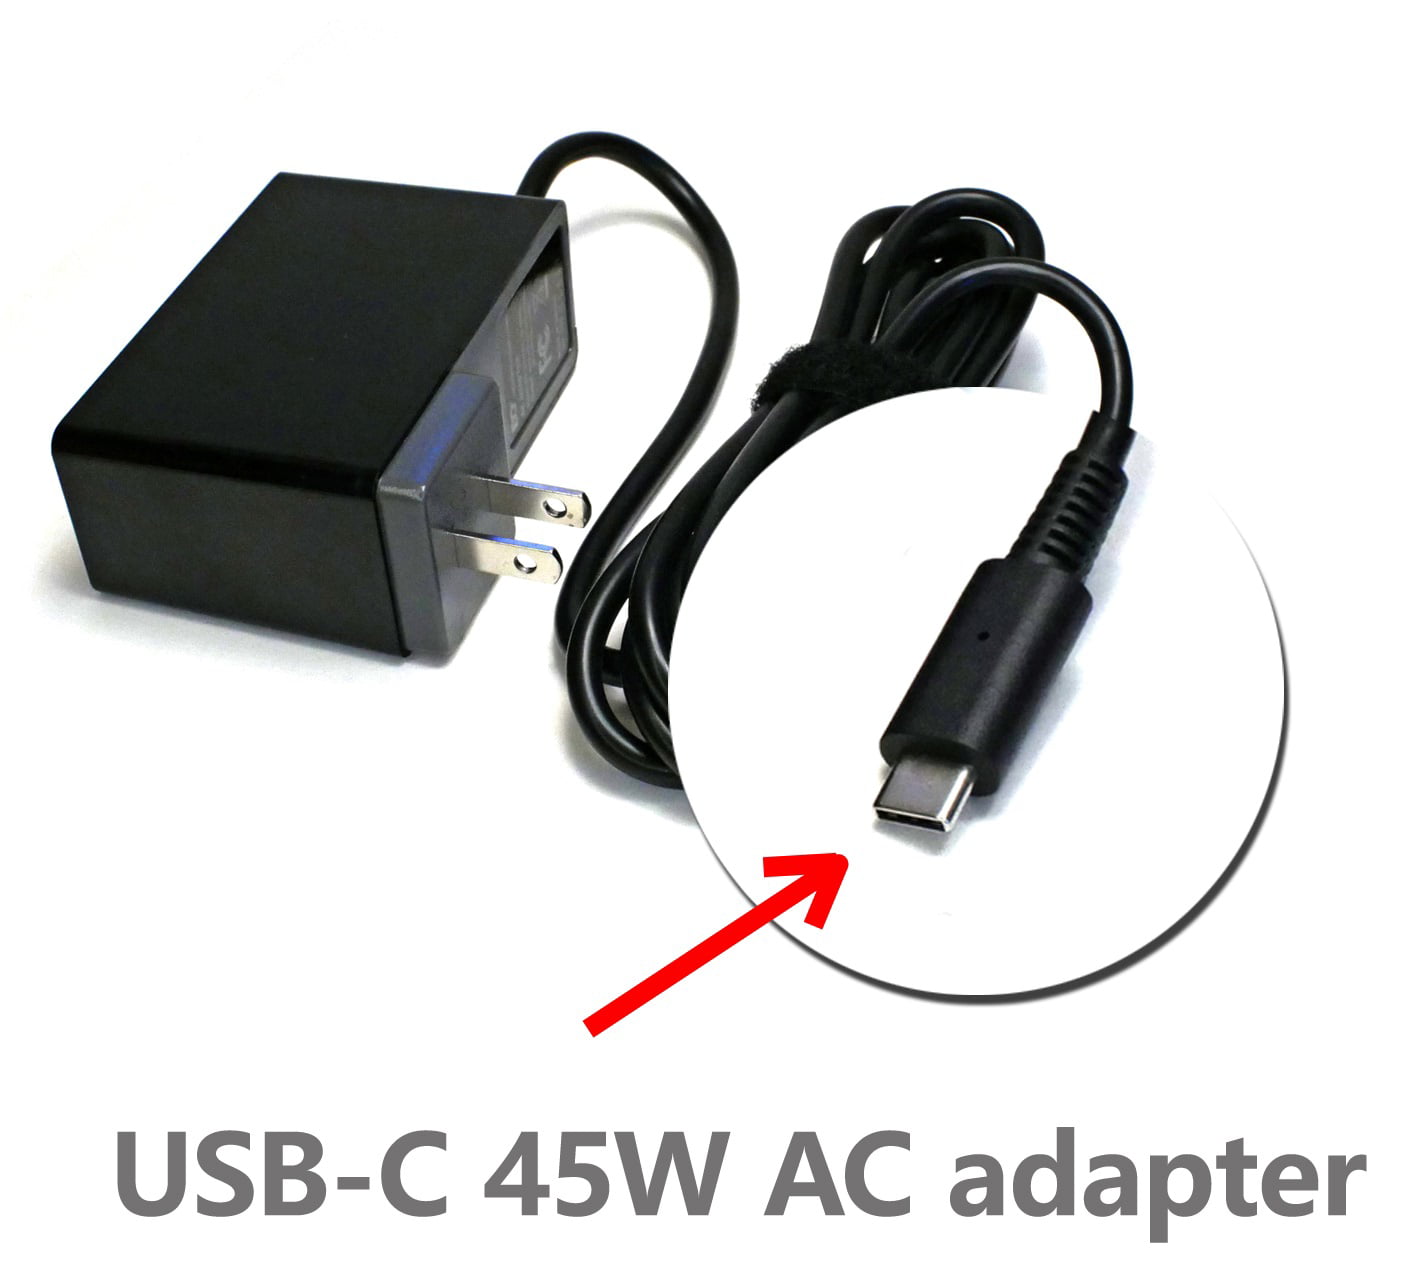 14.1  NEW Chuwi Broonel Type C Adapter For CHUWI LapBook Pro 